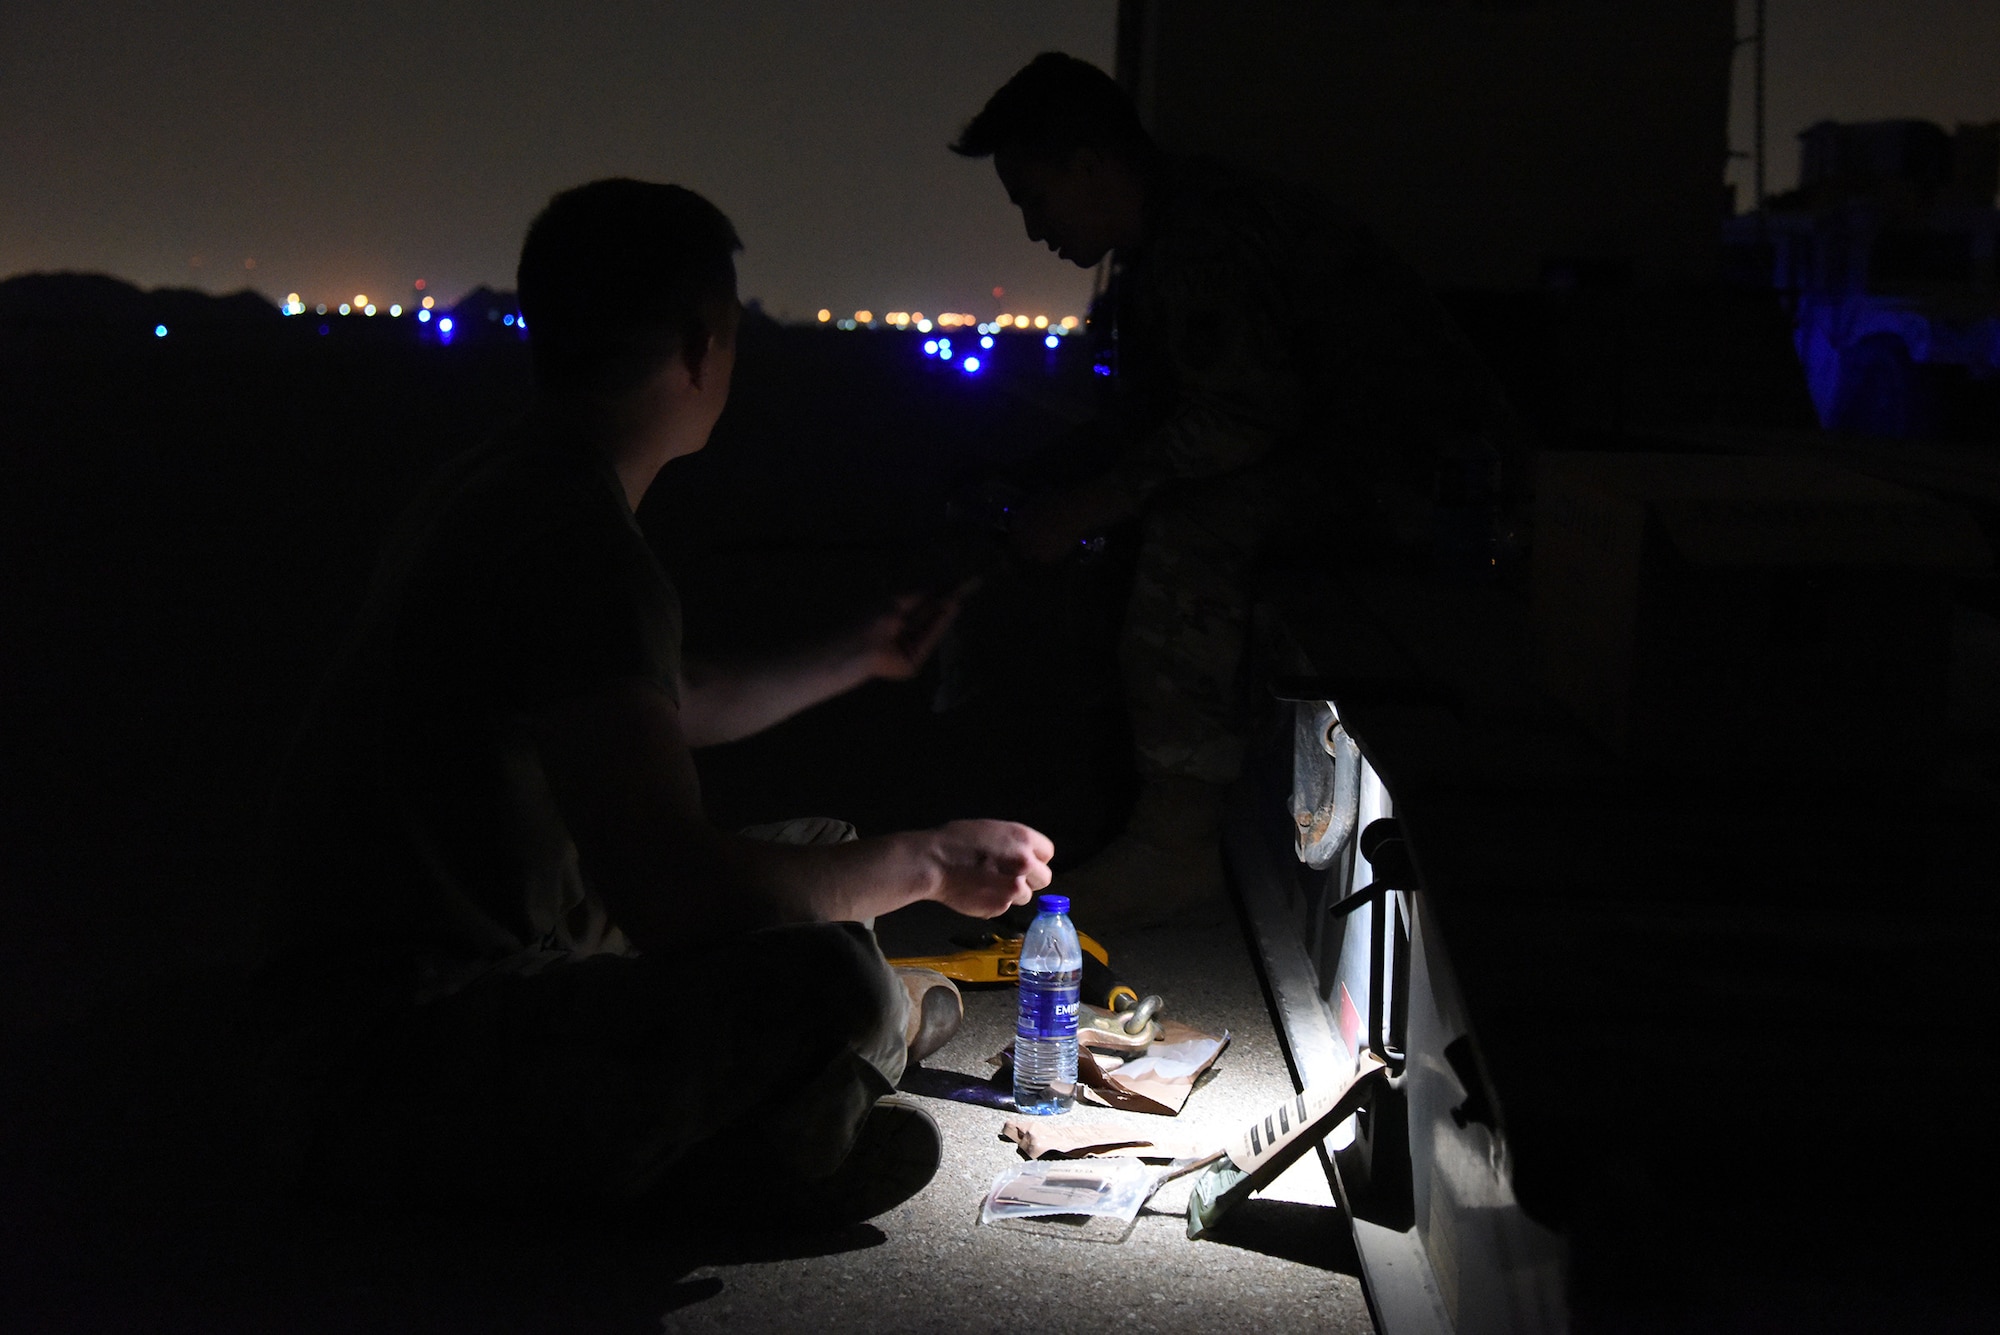 U.S. Air Force Airman First Class Tyler King, Multi-Capable Airman Team 1 member, prepares his Meal Ready to Eat in the early morning hours during the Operation Agile Spartan 4 exercise at Al Dhafra Air Base, United Arab Emirates, March 10, 2023. Operation Agile Spartan 4 tested Al Dhafra AB’s Multi-Capable Airmen’s abilities to launch, receive, and recover air frames in remote locations. (U.S. Air Force photo by Tech. Sgt. Chris Jacobs/released)